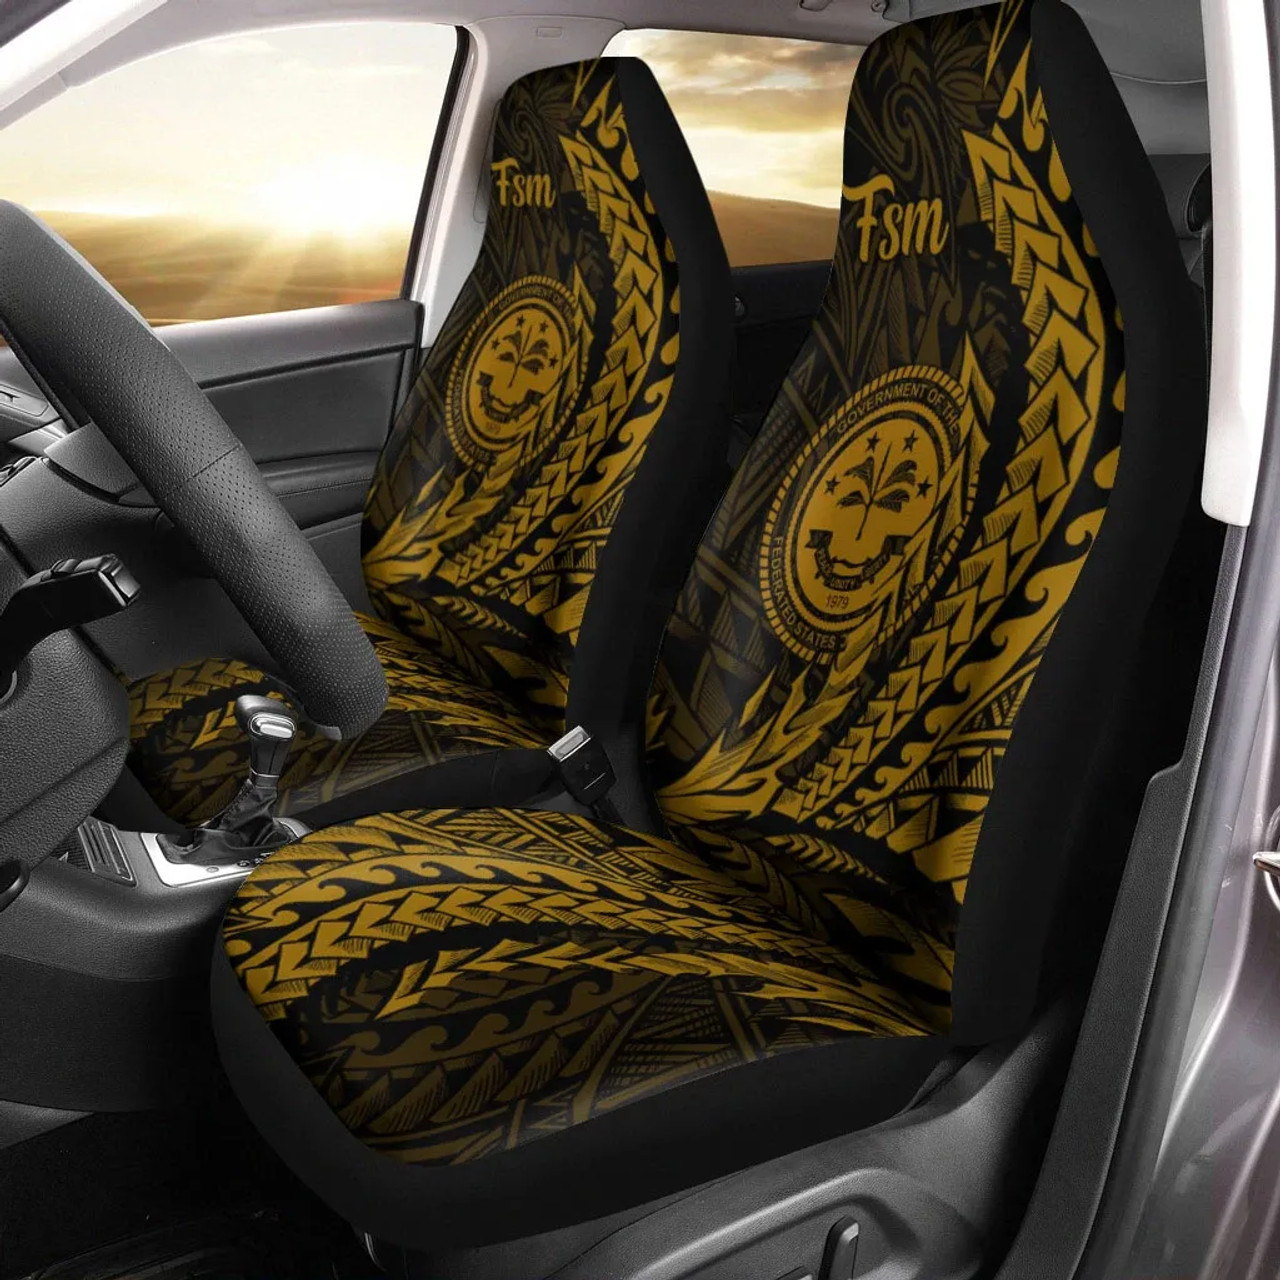 Federated States of Micronesia Car Seat Cover - Wings Style